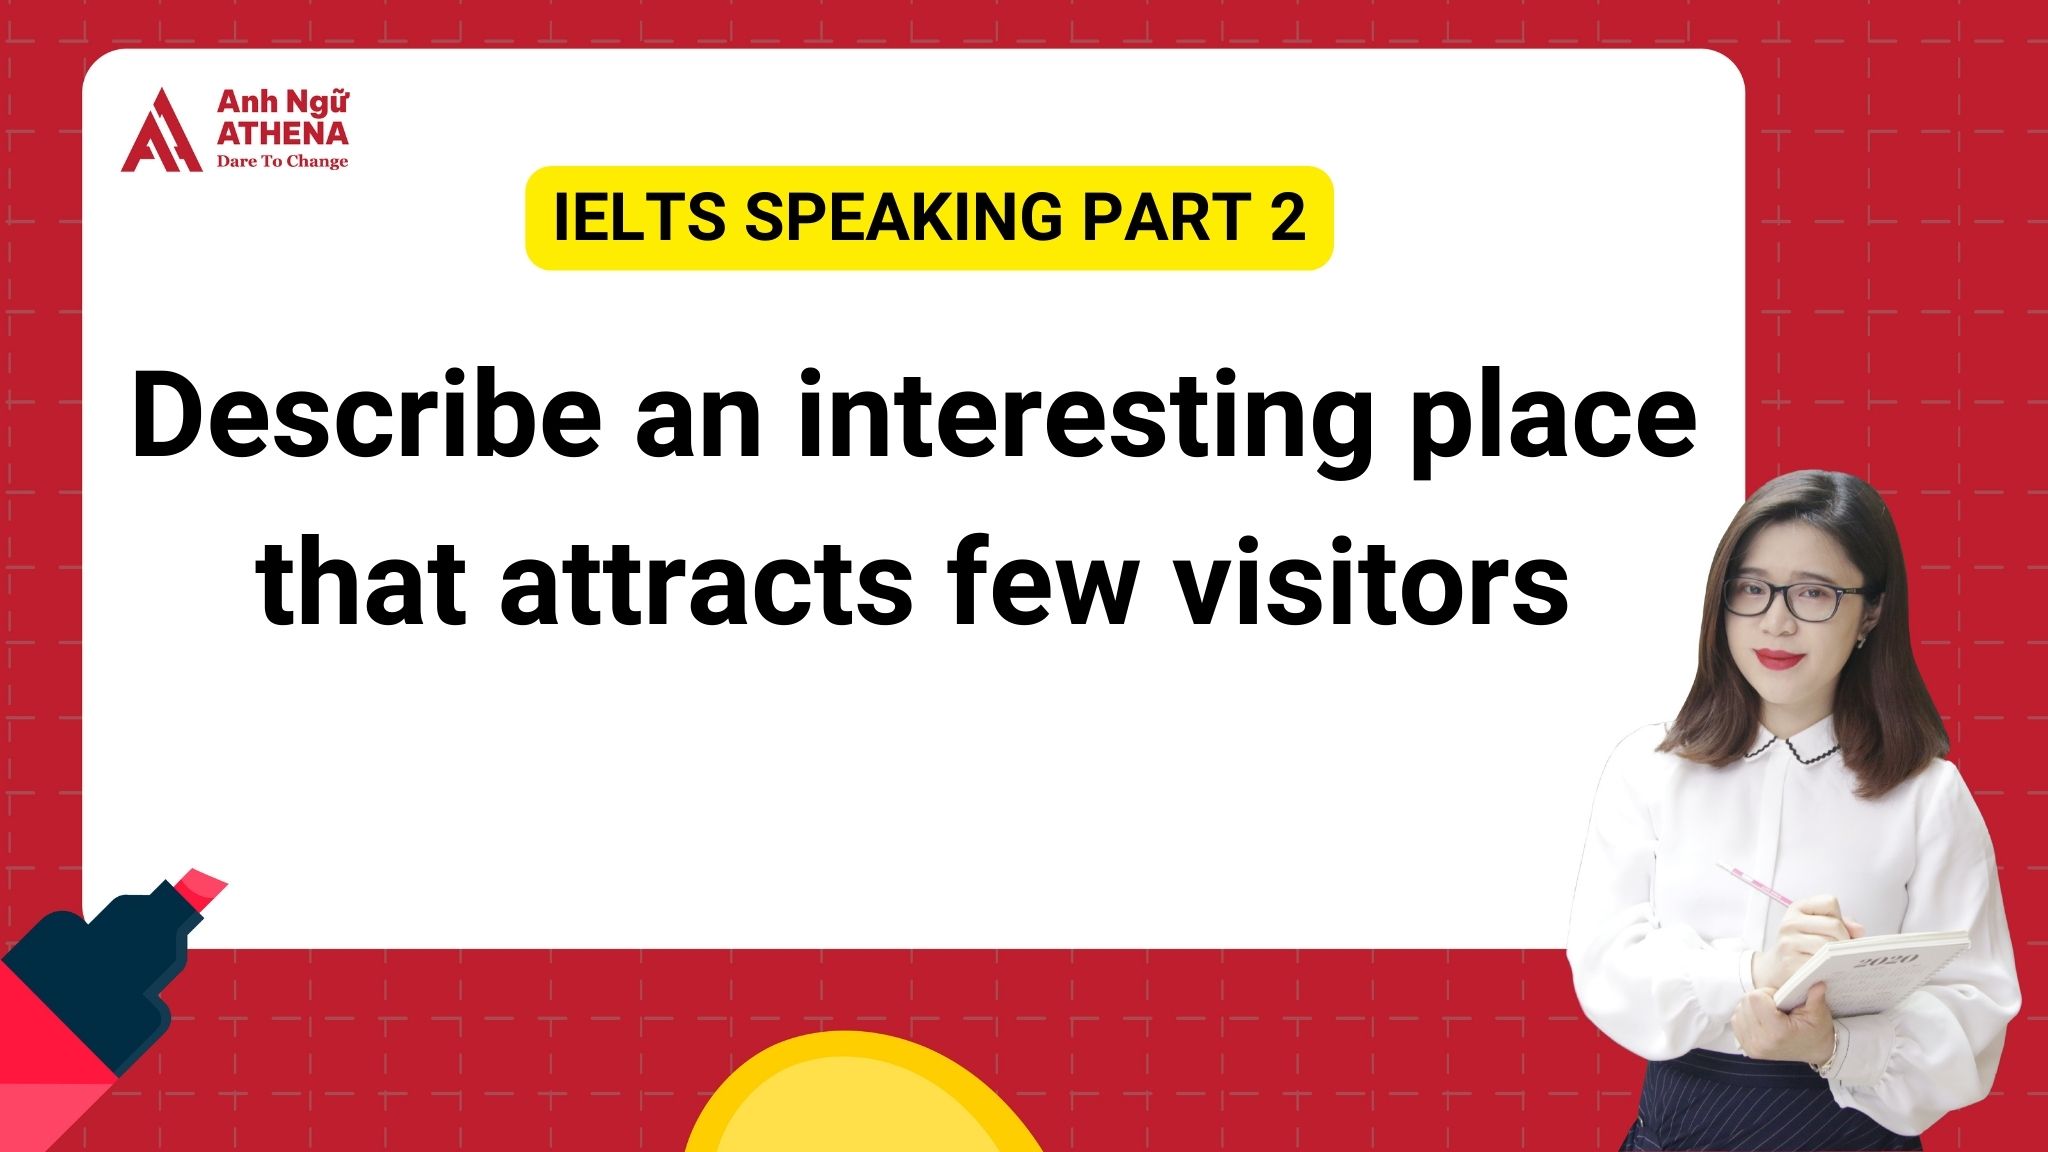 Giải đề IELTS Speaking Part 2: Describe an interesting place that attracts few visitors